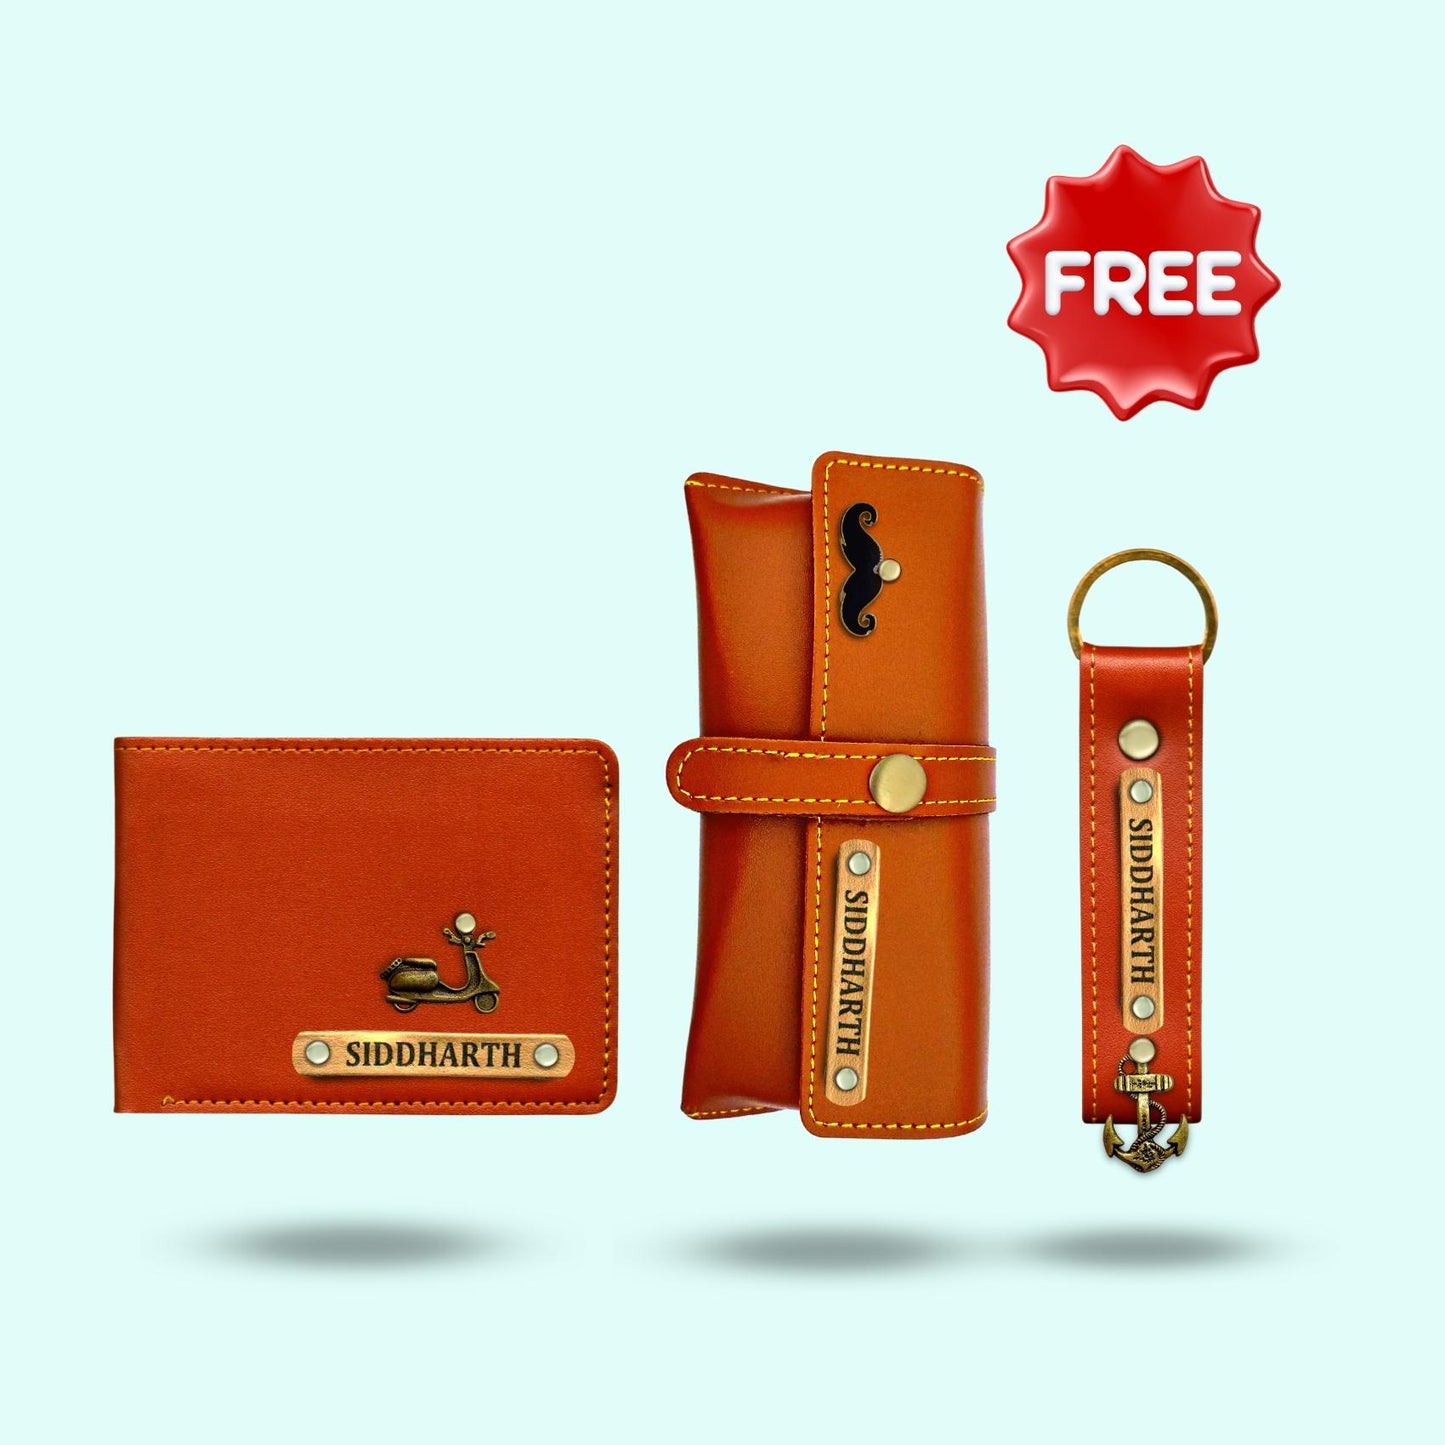 Personalized 3-in-1 Special Gift Hamper For Men - Tan - Includes 1 Free Keychain